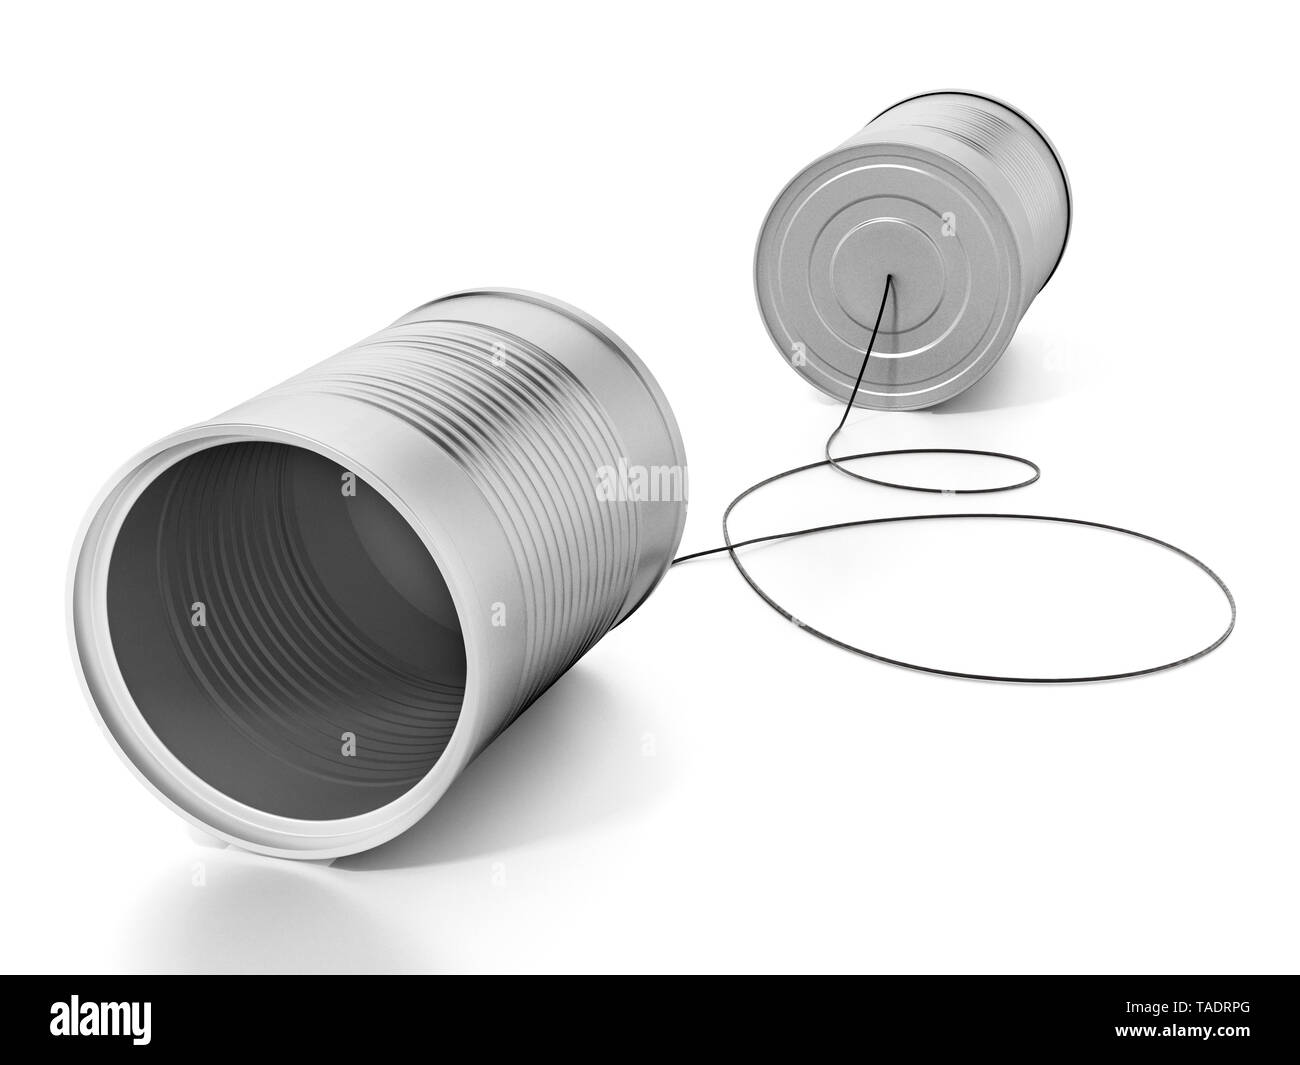 Tin cans connected to each other with a rope. 3D illustration. Stock Photo